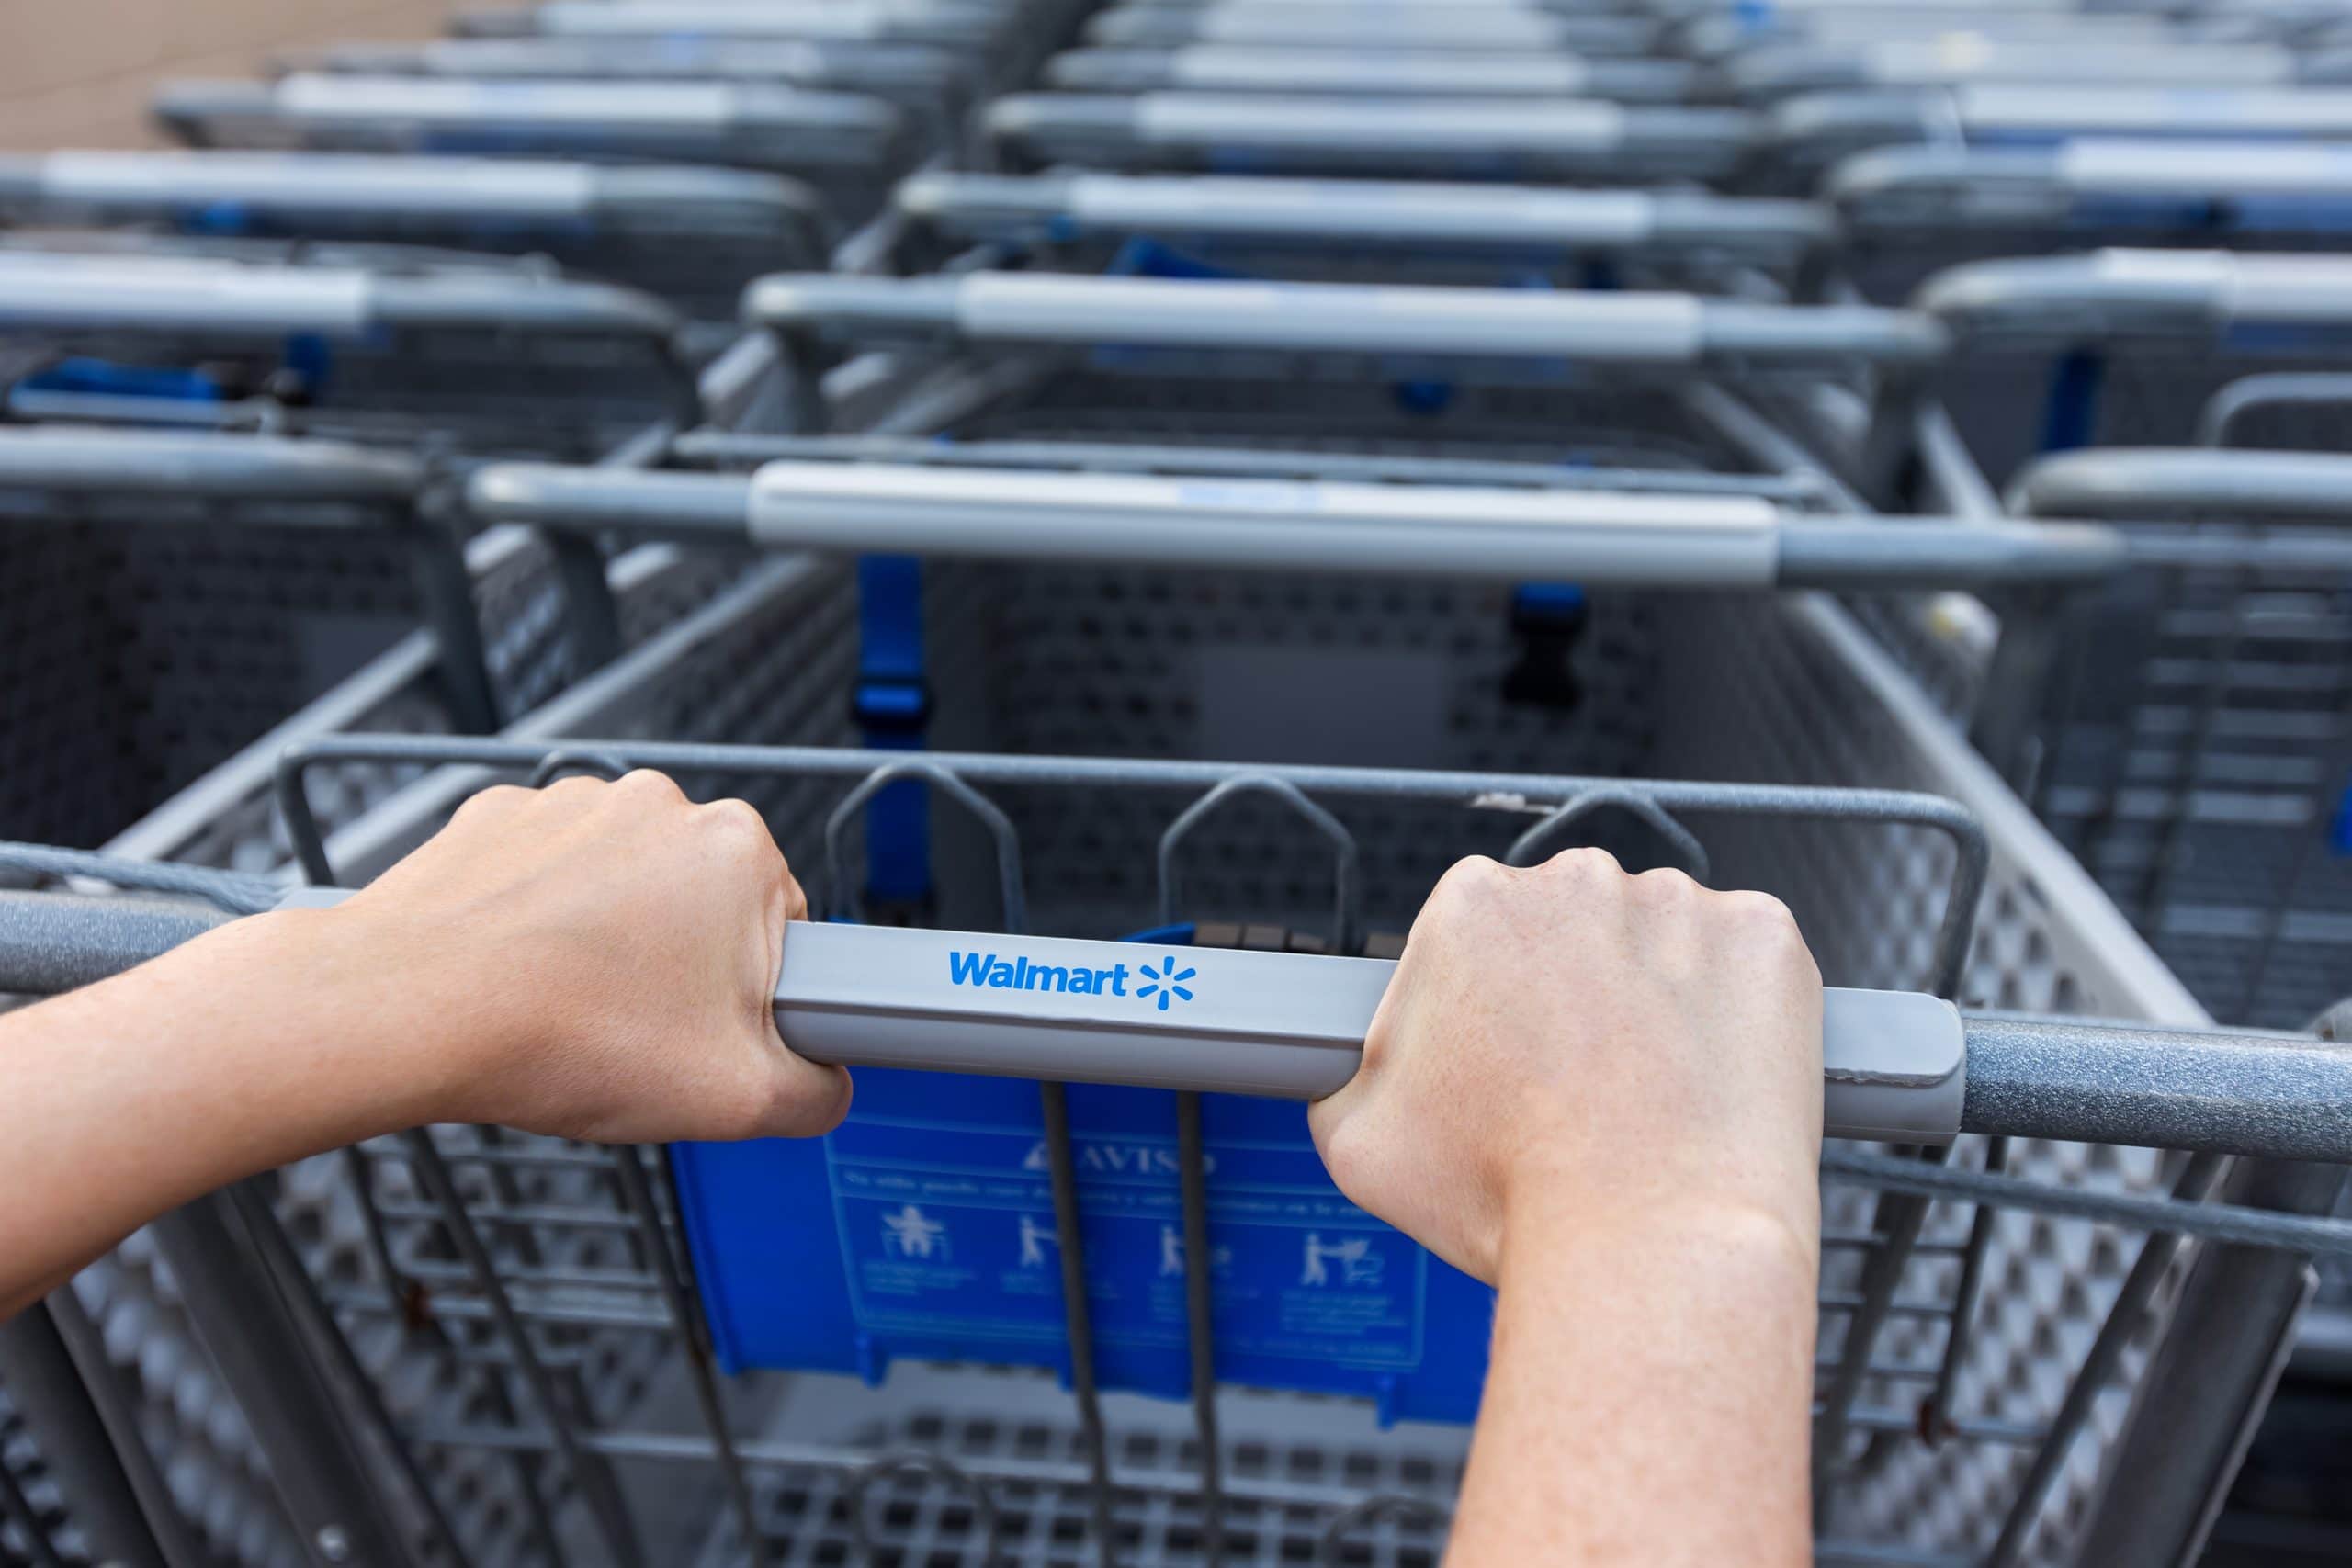 How to get Walmart gift cards for free: Tips for clever shoppers